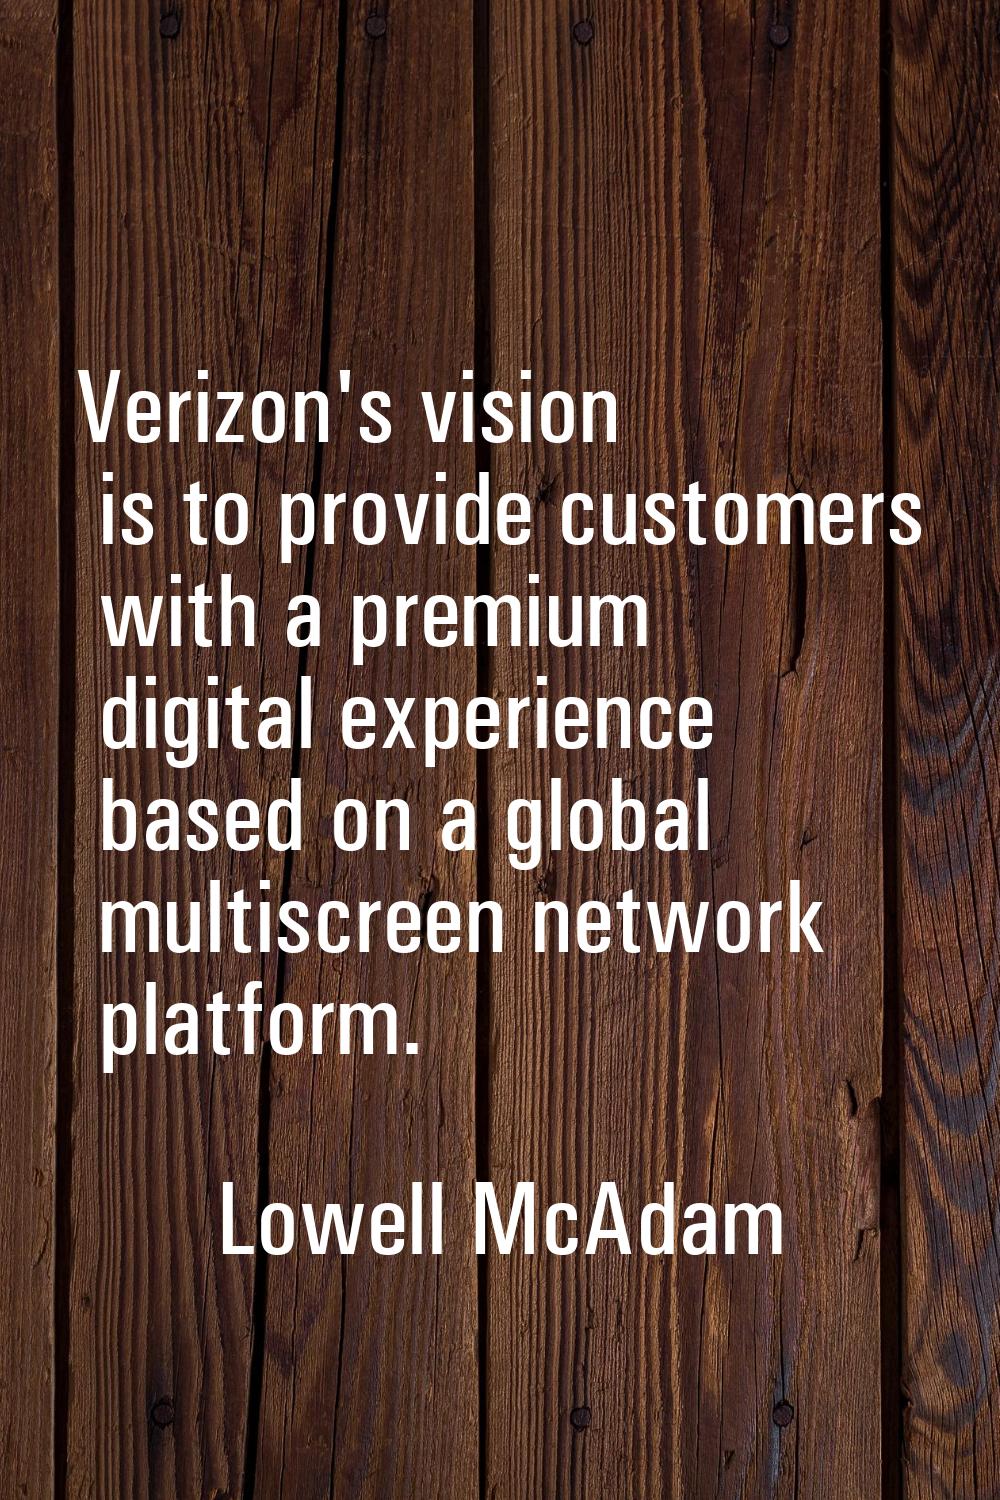 Verizon's vision is to provide customers with a premium digital experience based on a global multis